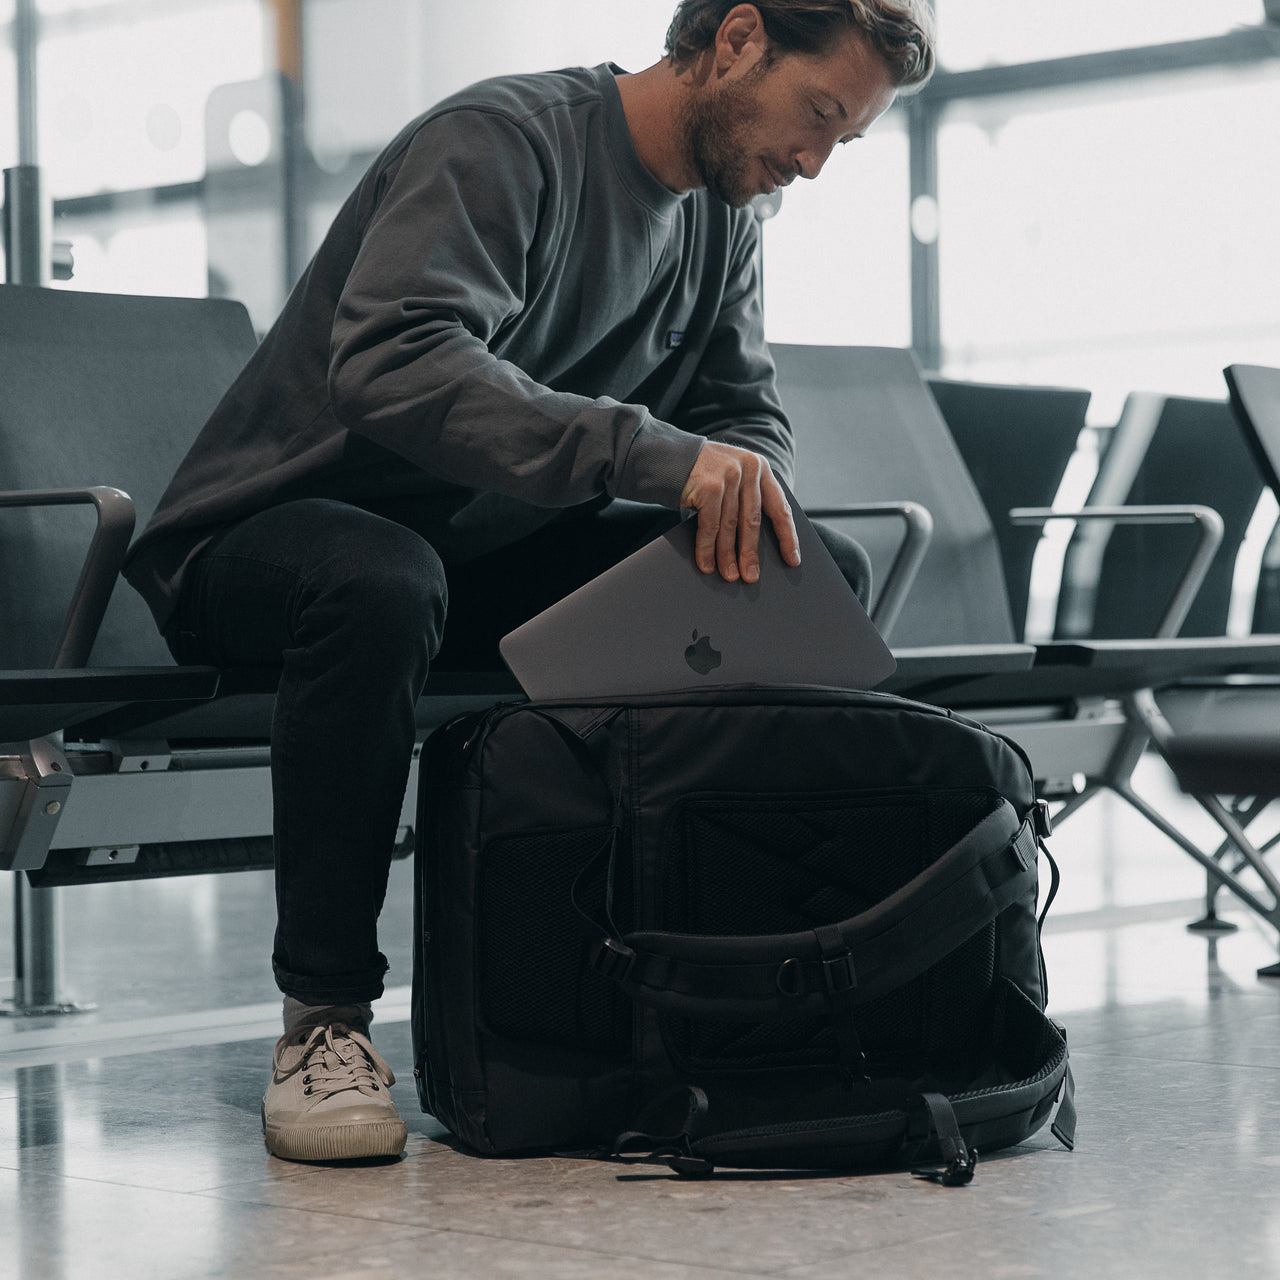 A man sat down in an airport, putting a laptop into The Adventure Bag in All Black